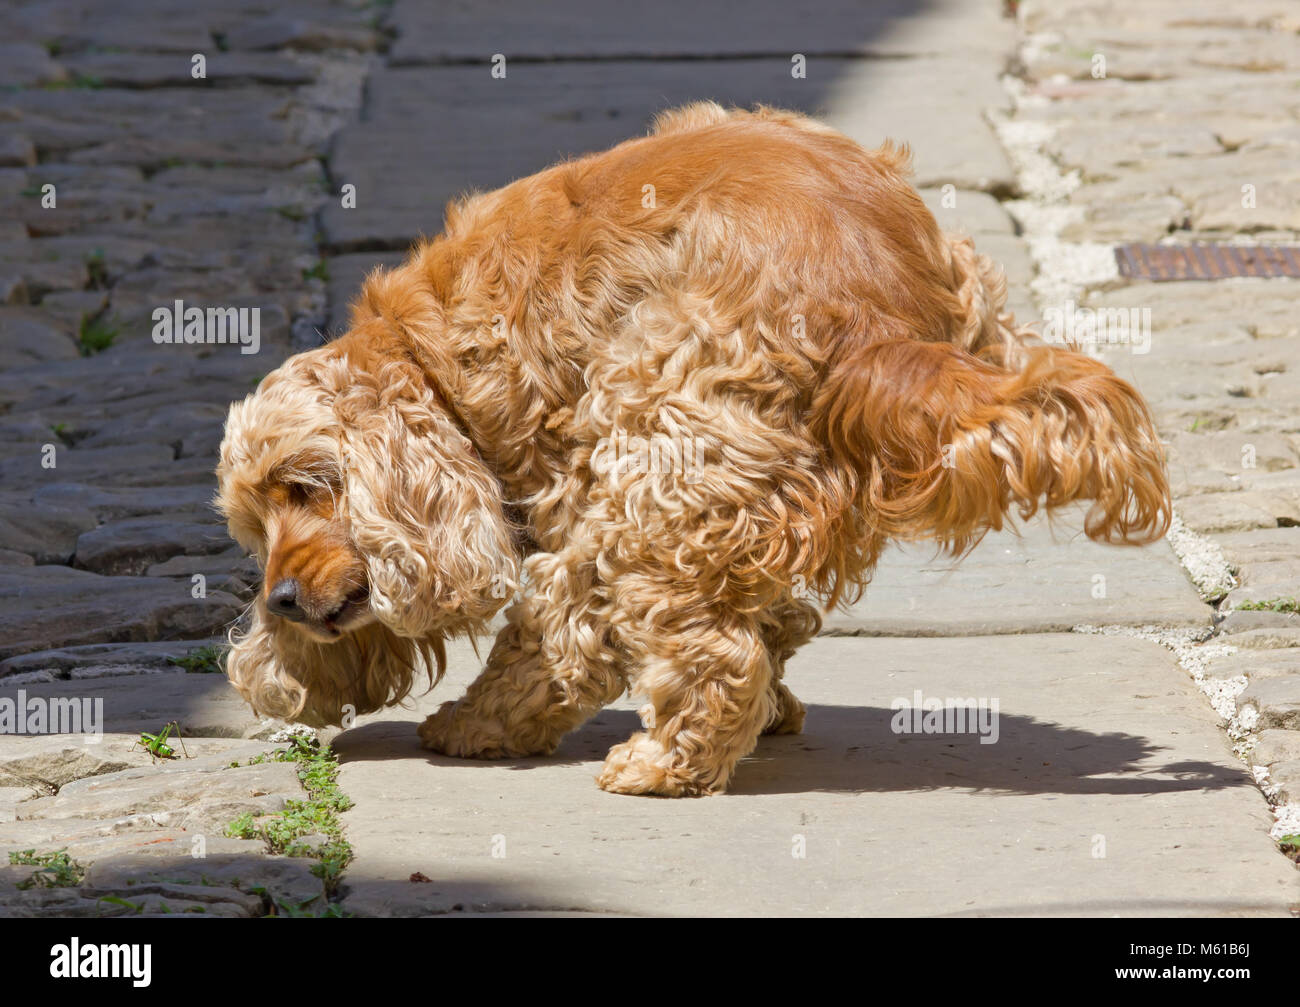 47 HQ Pictures Brown And Black Curly Haired Dog : Curly Haired Dog High Resolution Stock Photography And Images Alamy